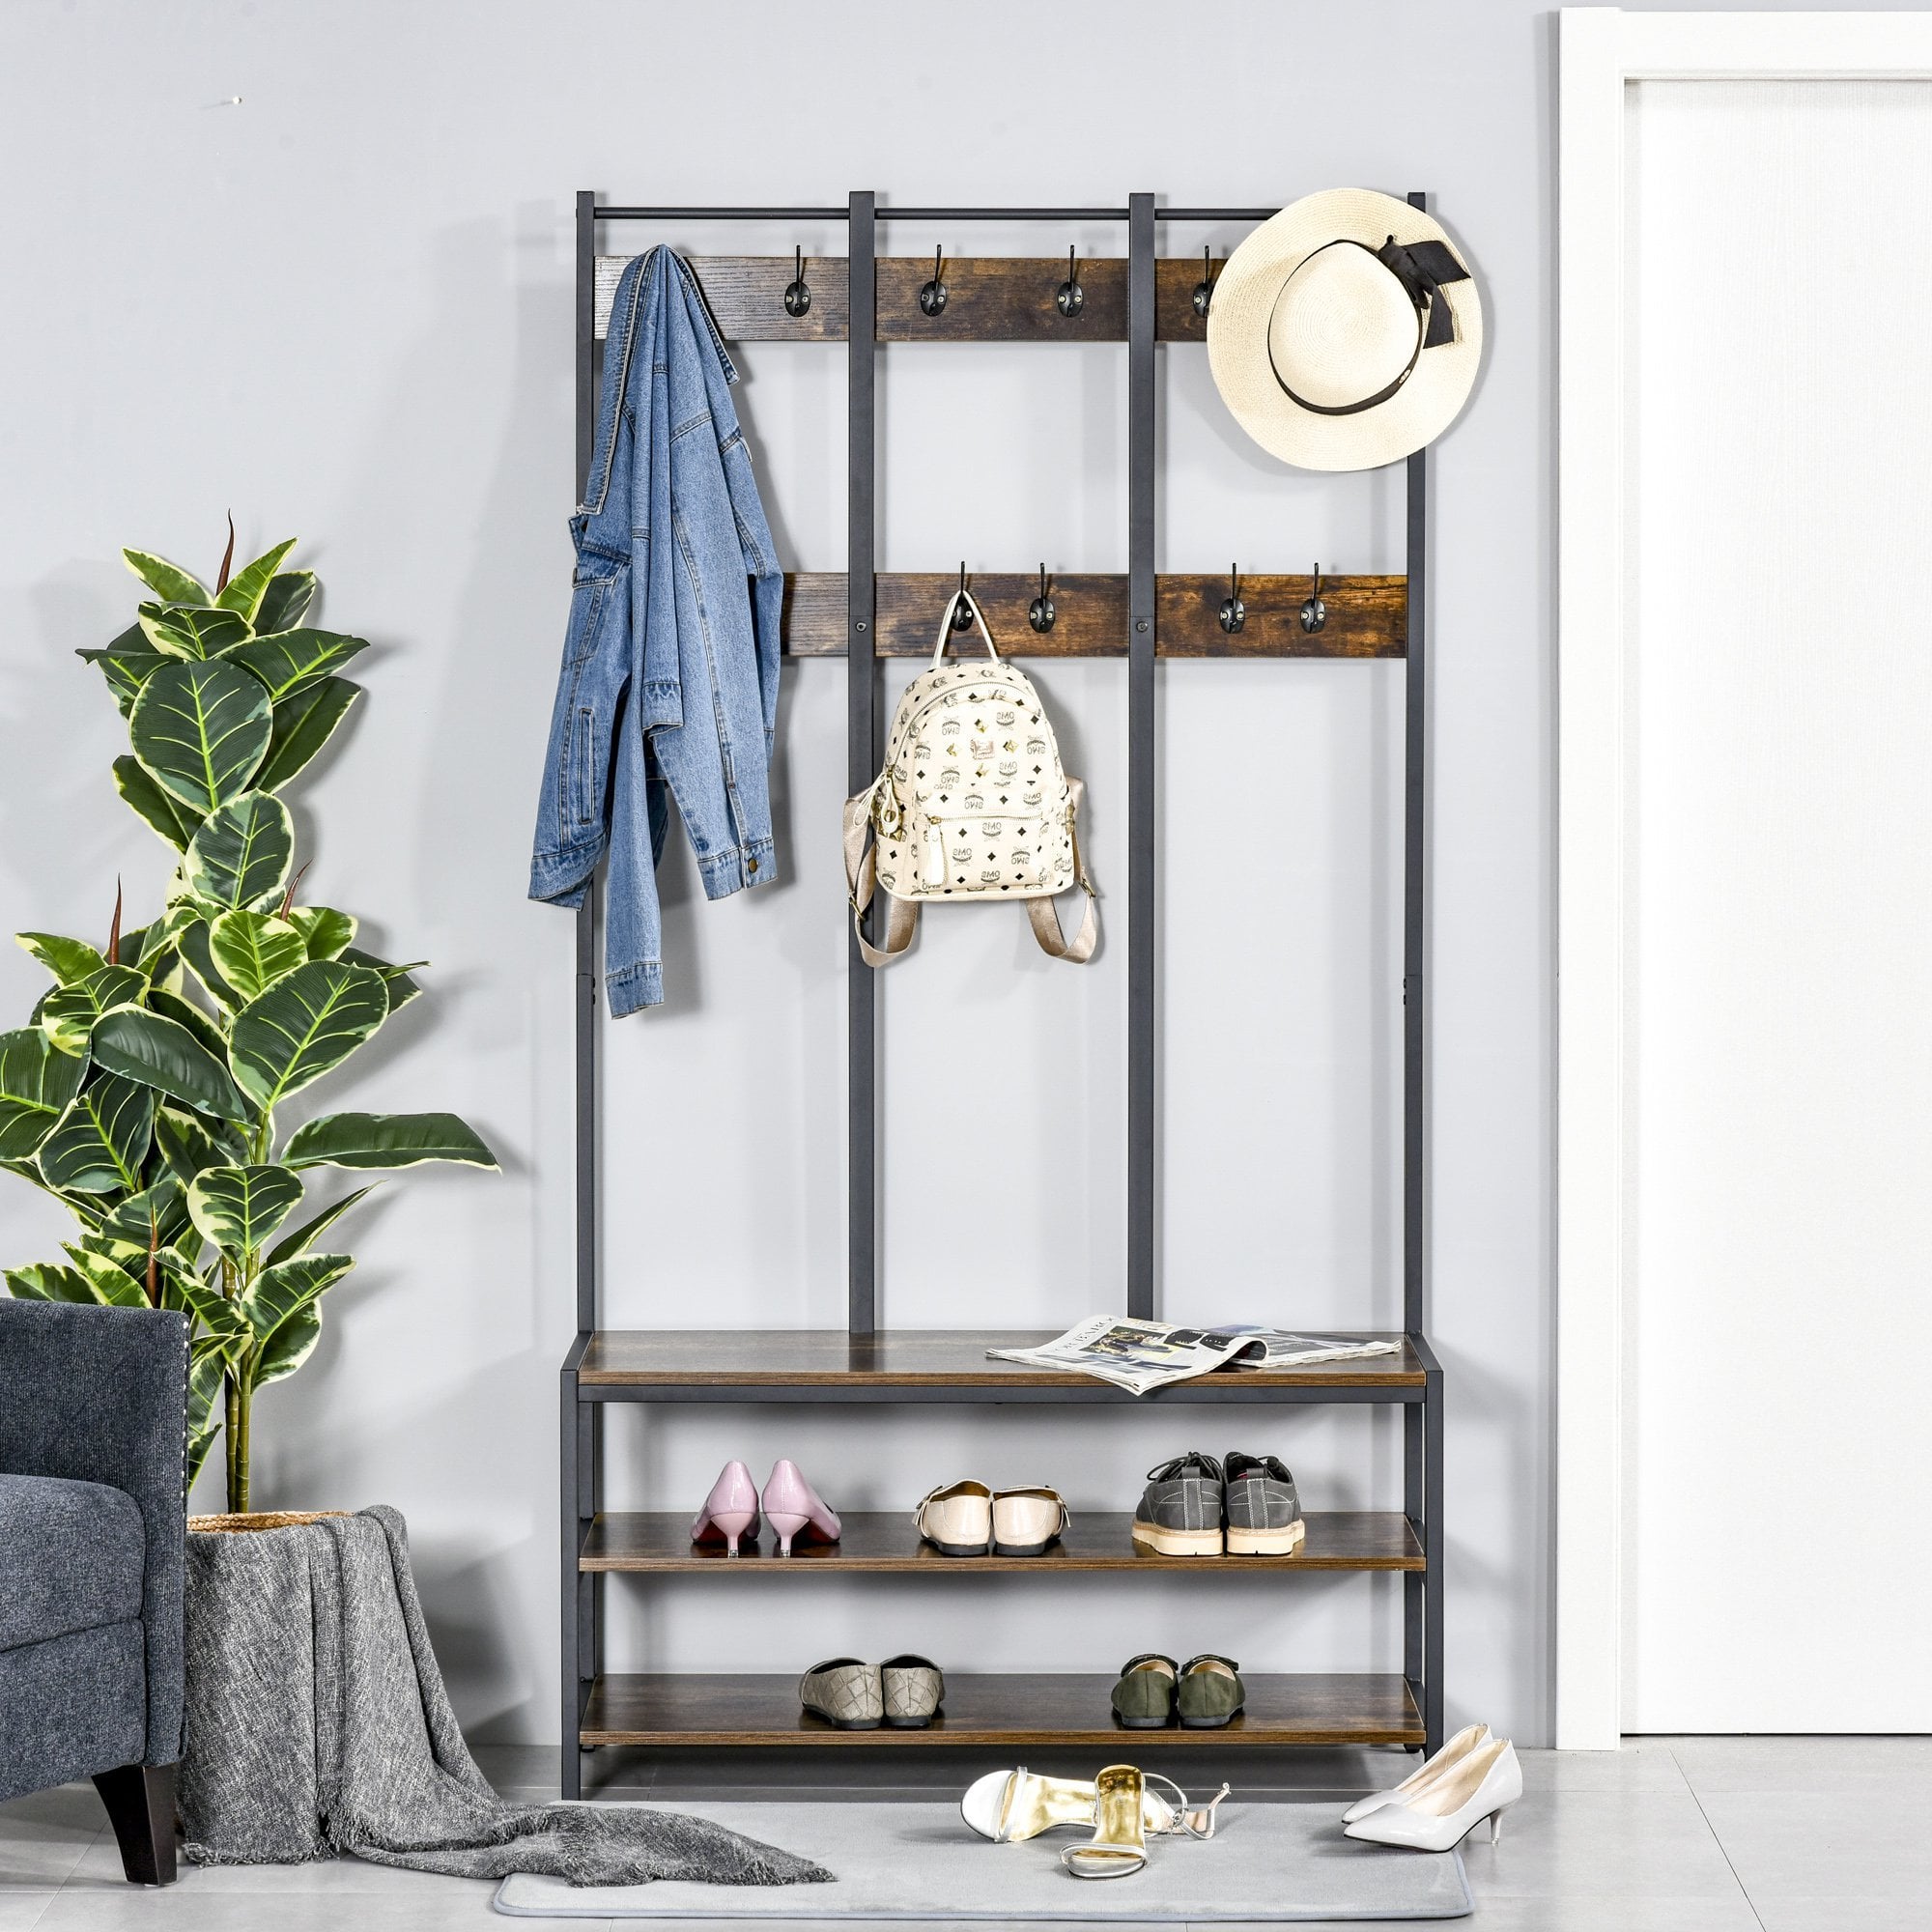 Coat Rack Stand - Free Standing Hall Tree - Coat Stand with Hooks - Bench and Shoe Rack - 100cm x 40cm x 184cm - Industrial Style - Rustic Brown and B